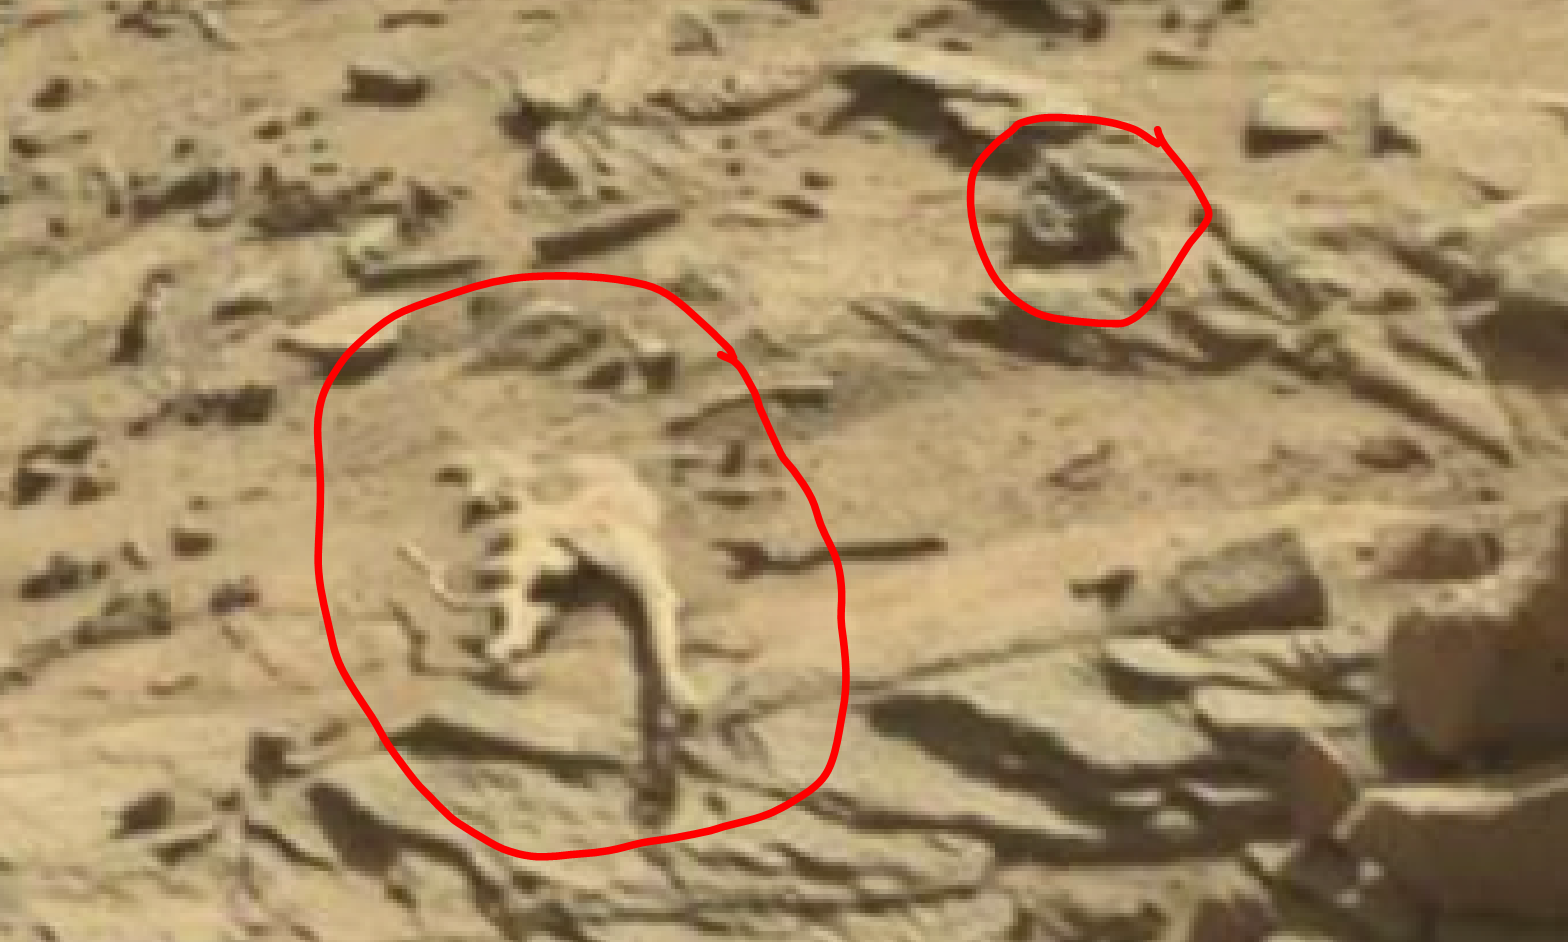 mars sol 1298 anomaly-artifacts 2a was life on mars